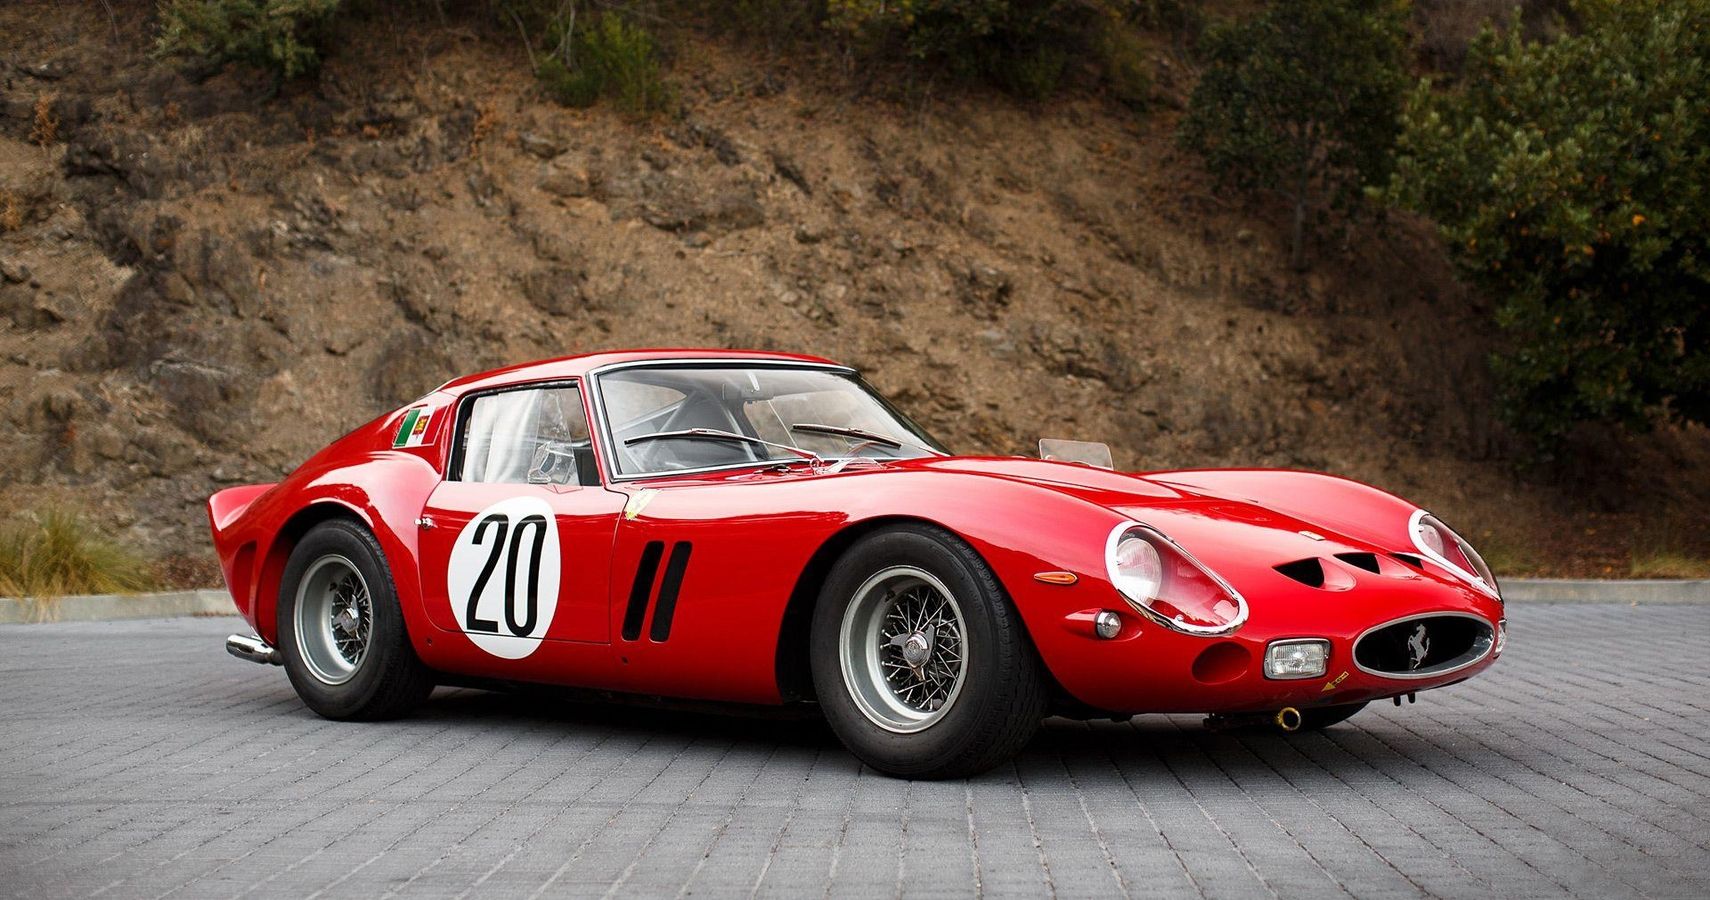 Here's What Makes The 1963 Ferrari 250 GTO The Most Expensive Classic Car Of All Time